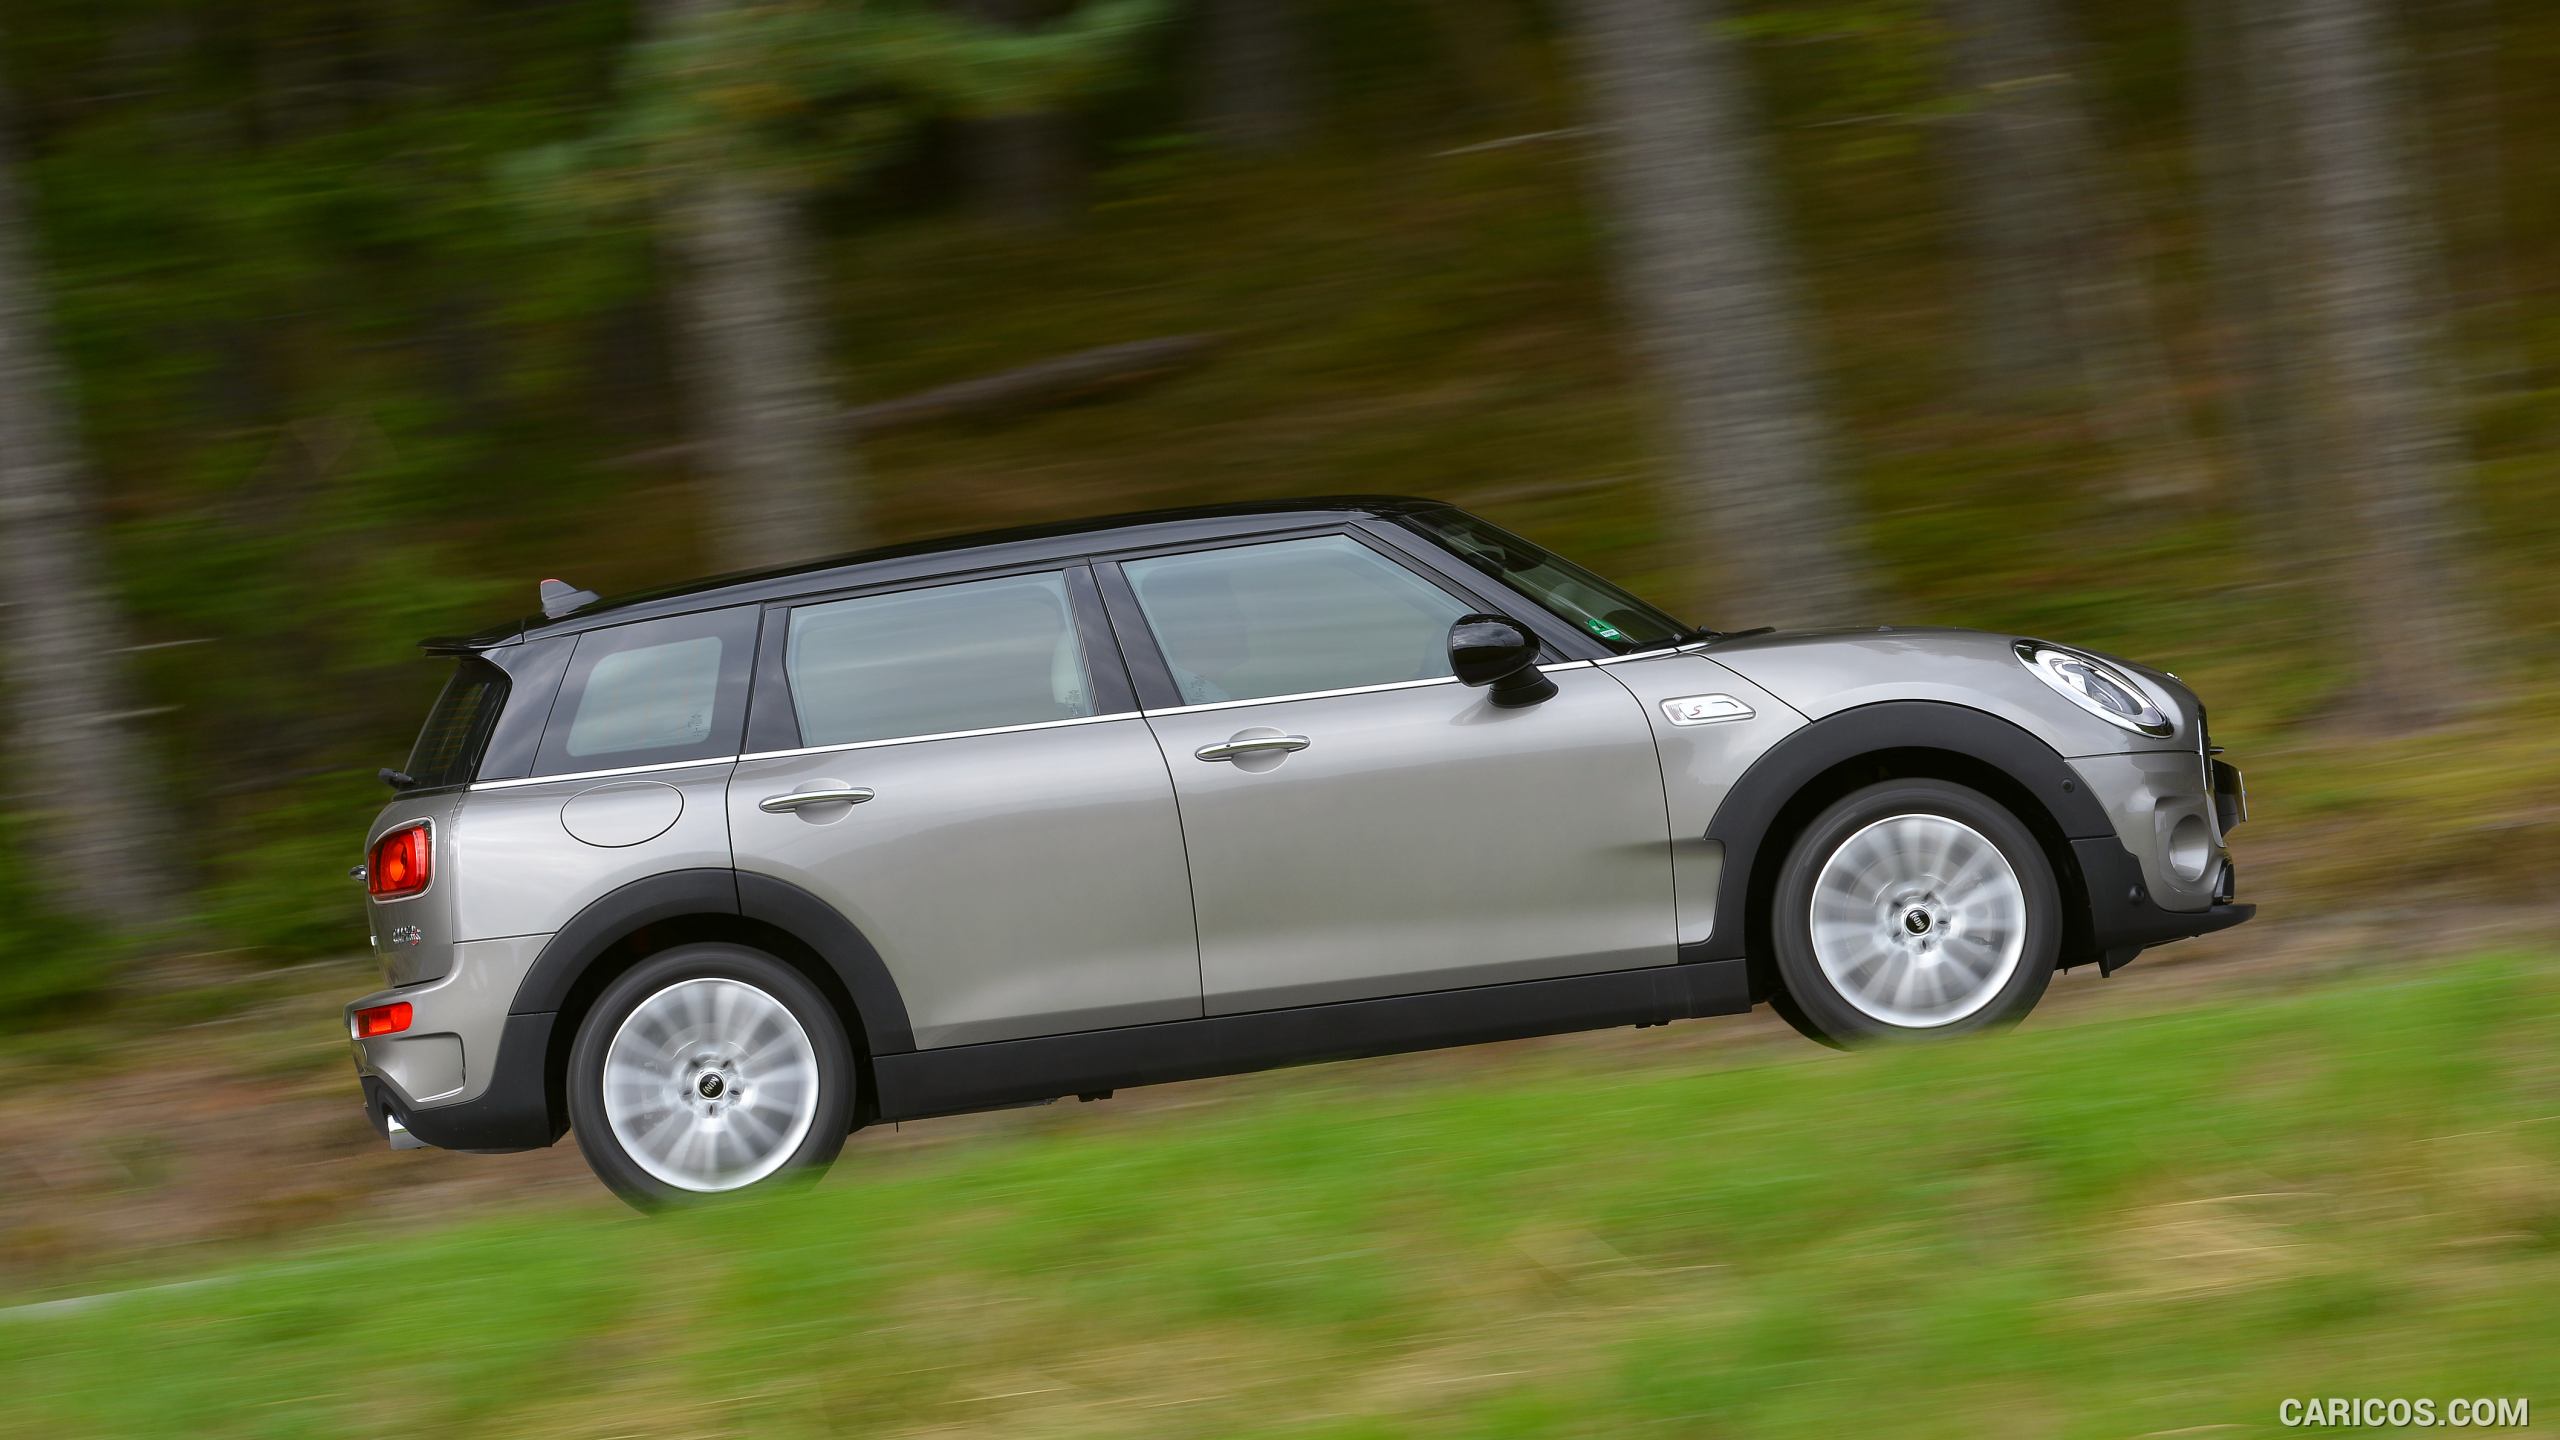 2016 MINI Cooper S Clubman in Metallic Melting Silver - Side, #152 of 380